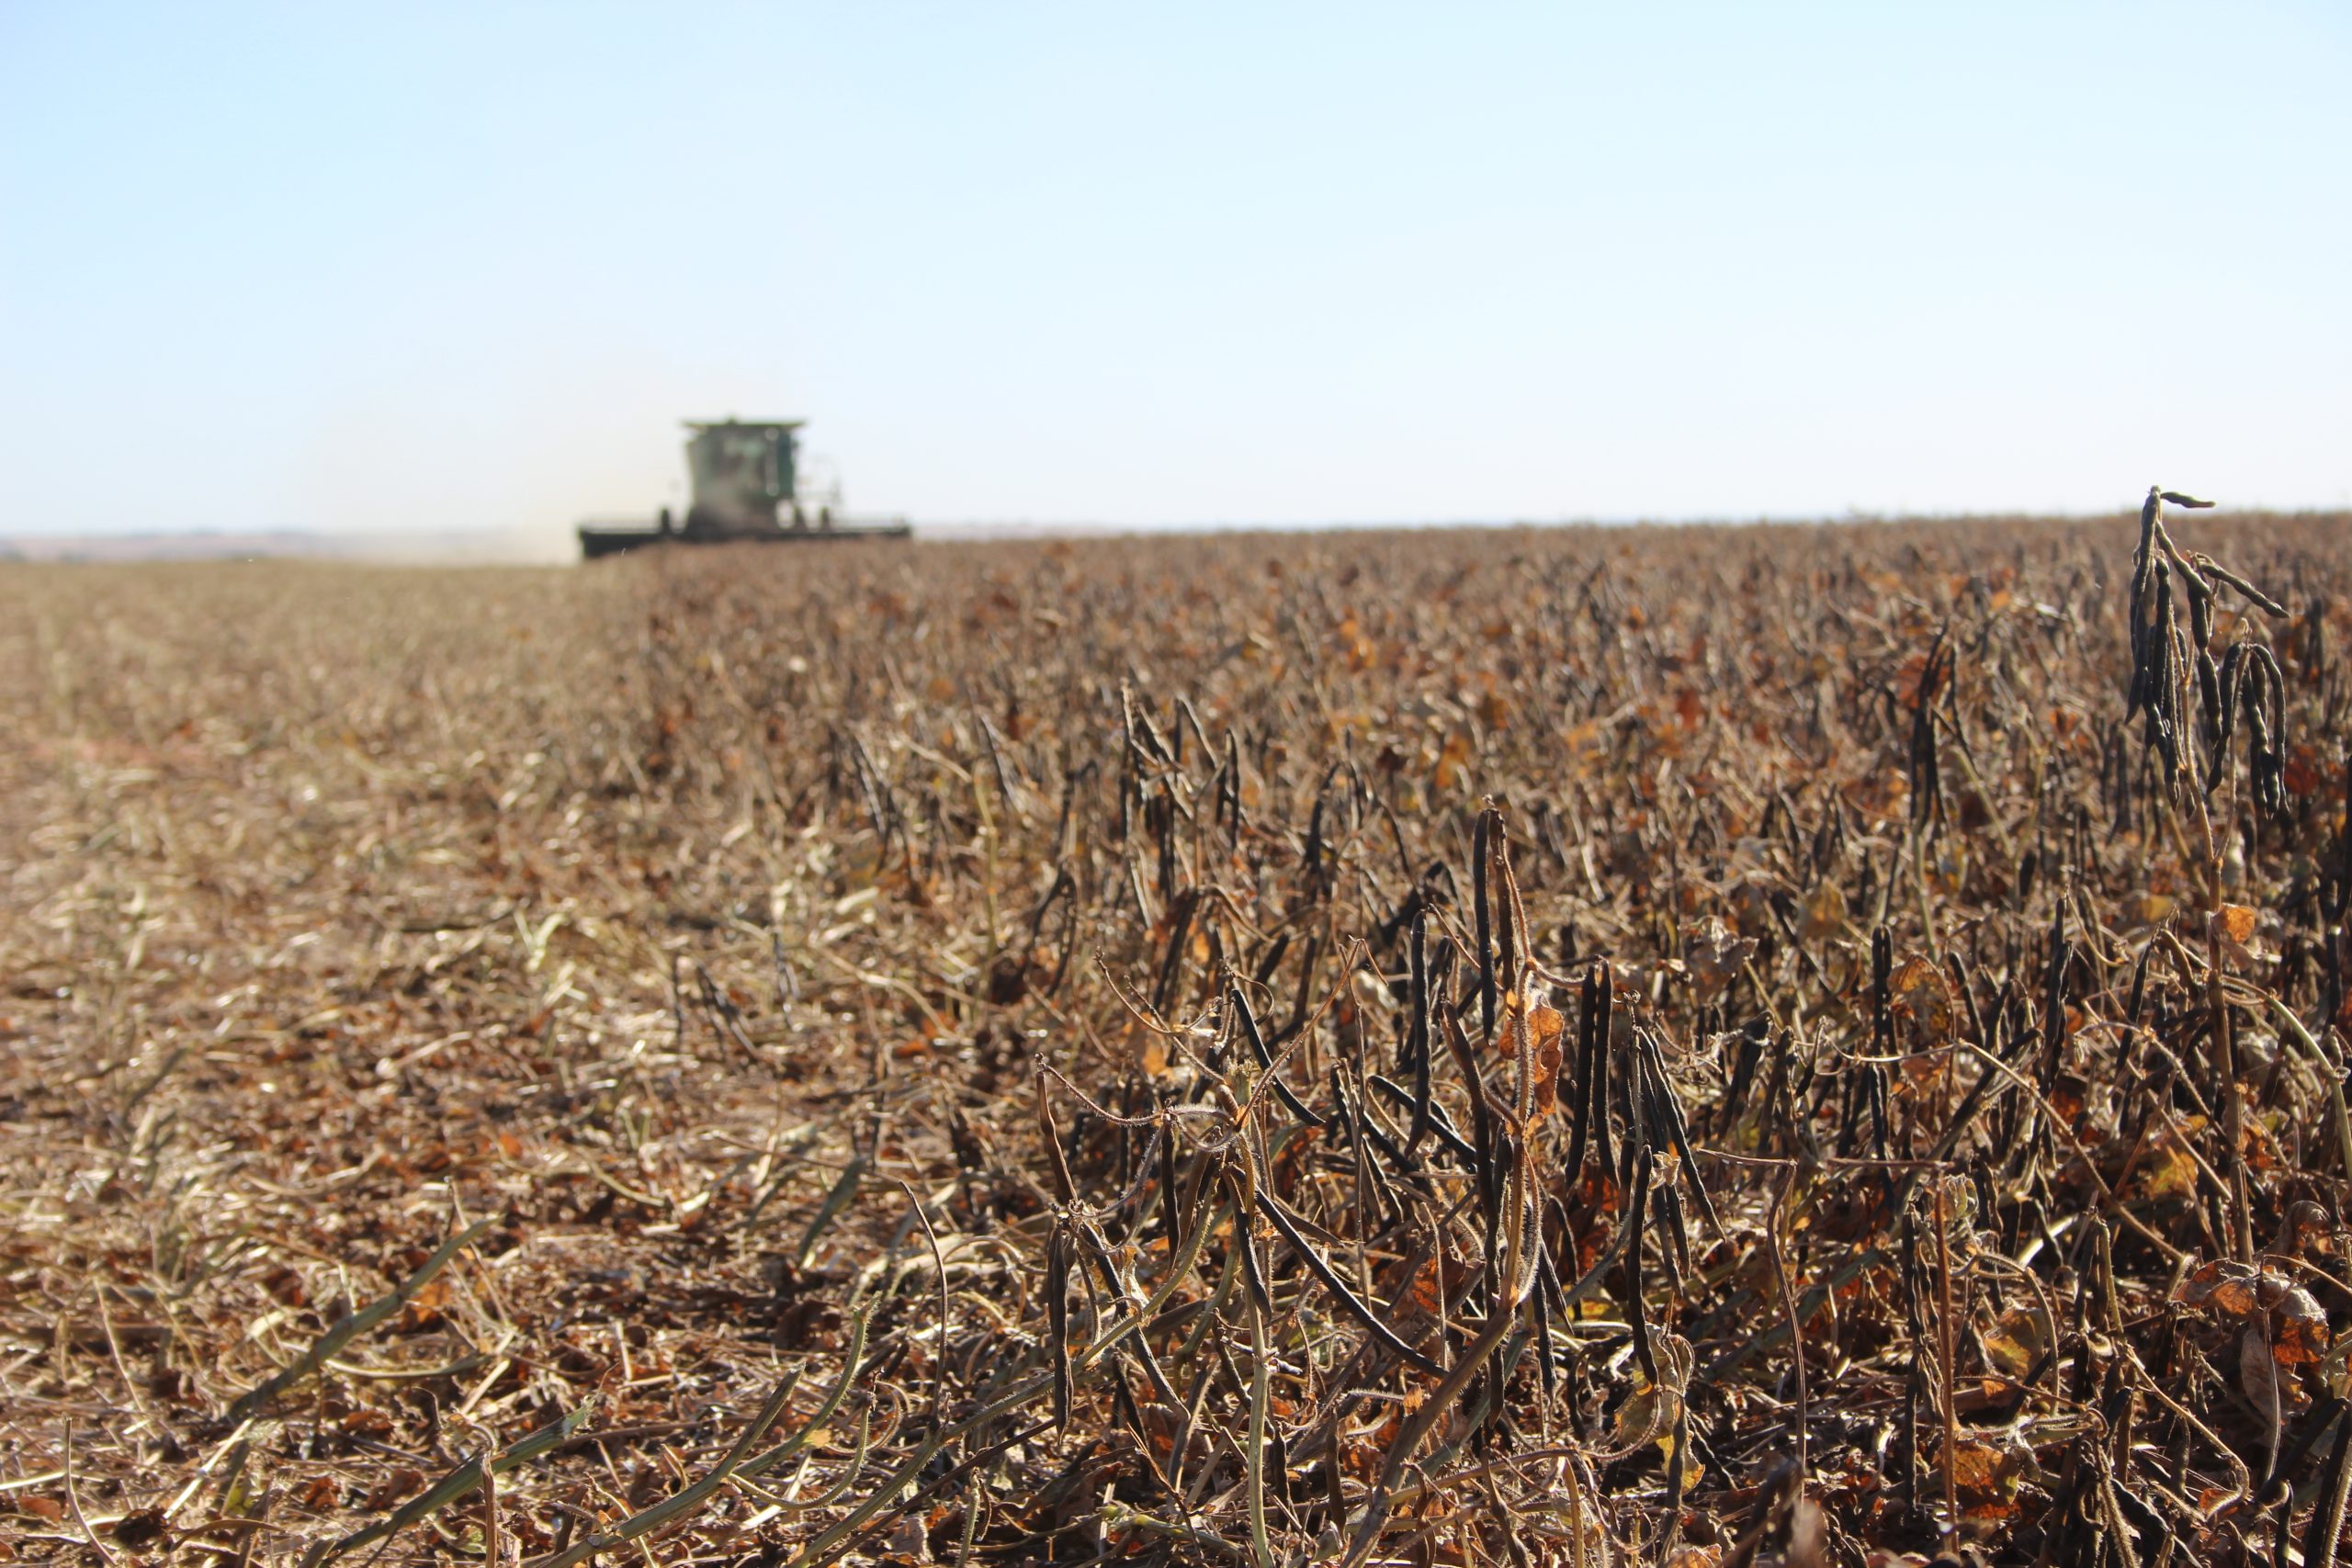 A mung bean field harvested in Oklahoma on Oct. 20. (Journal photo by Lacey Vilhauer.)